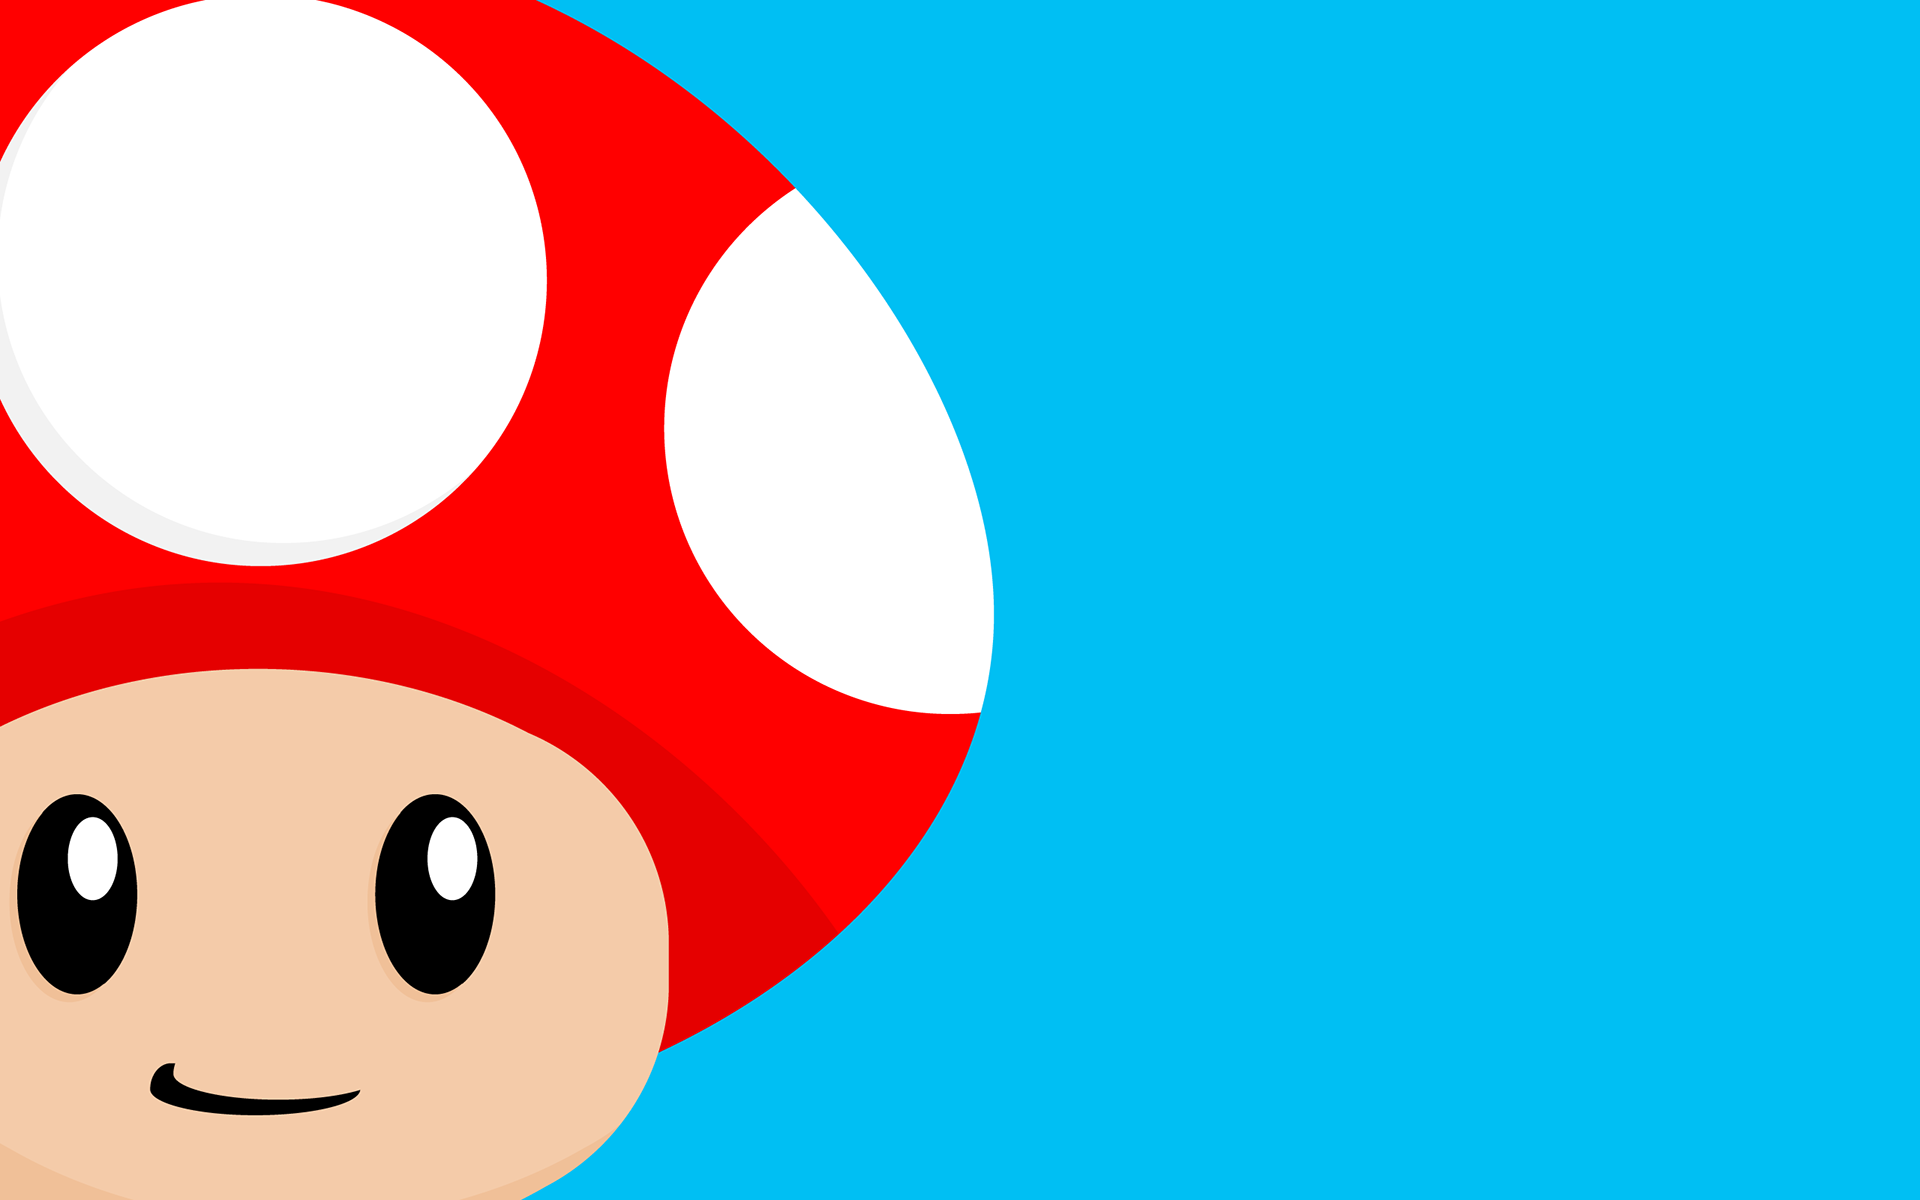 General 1920x1200 Super Mario Toad (character) blue background video game art minimalism colorful cyan background